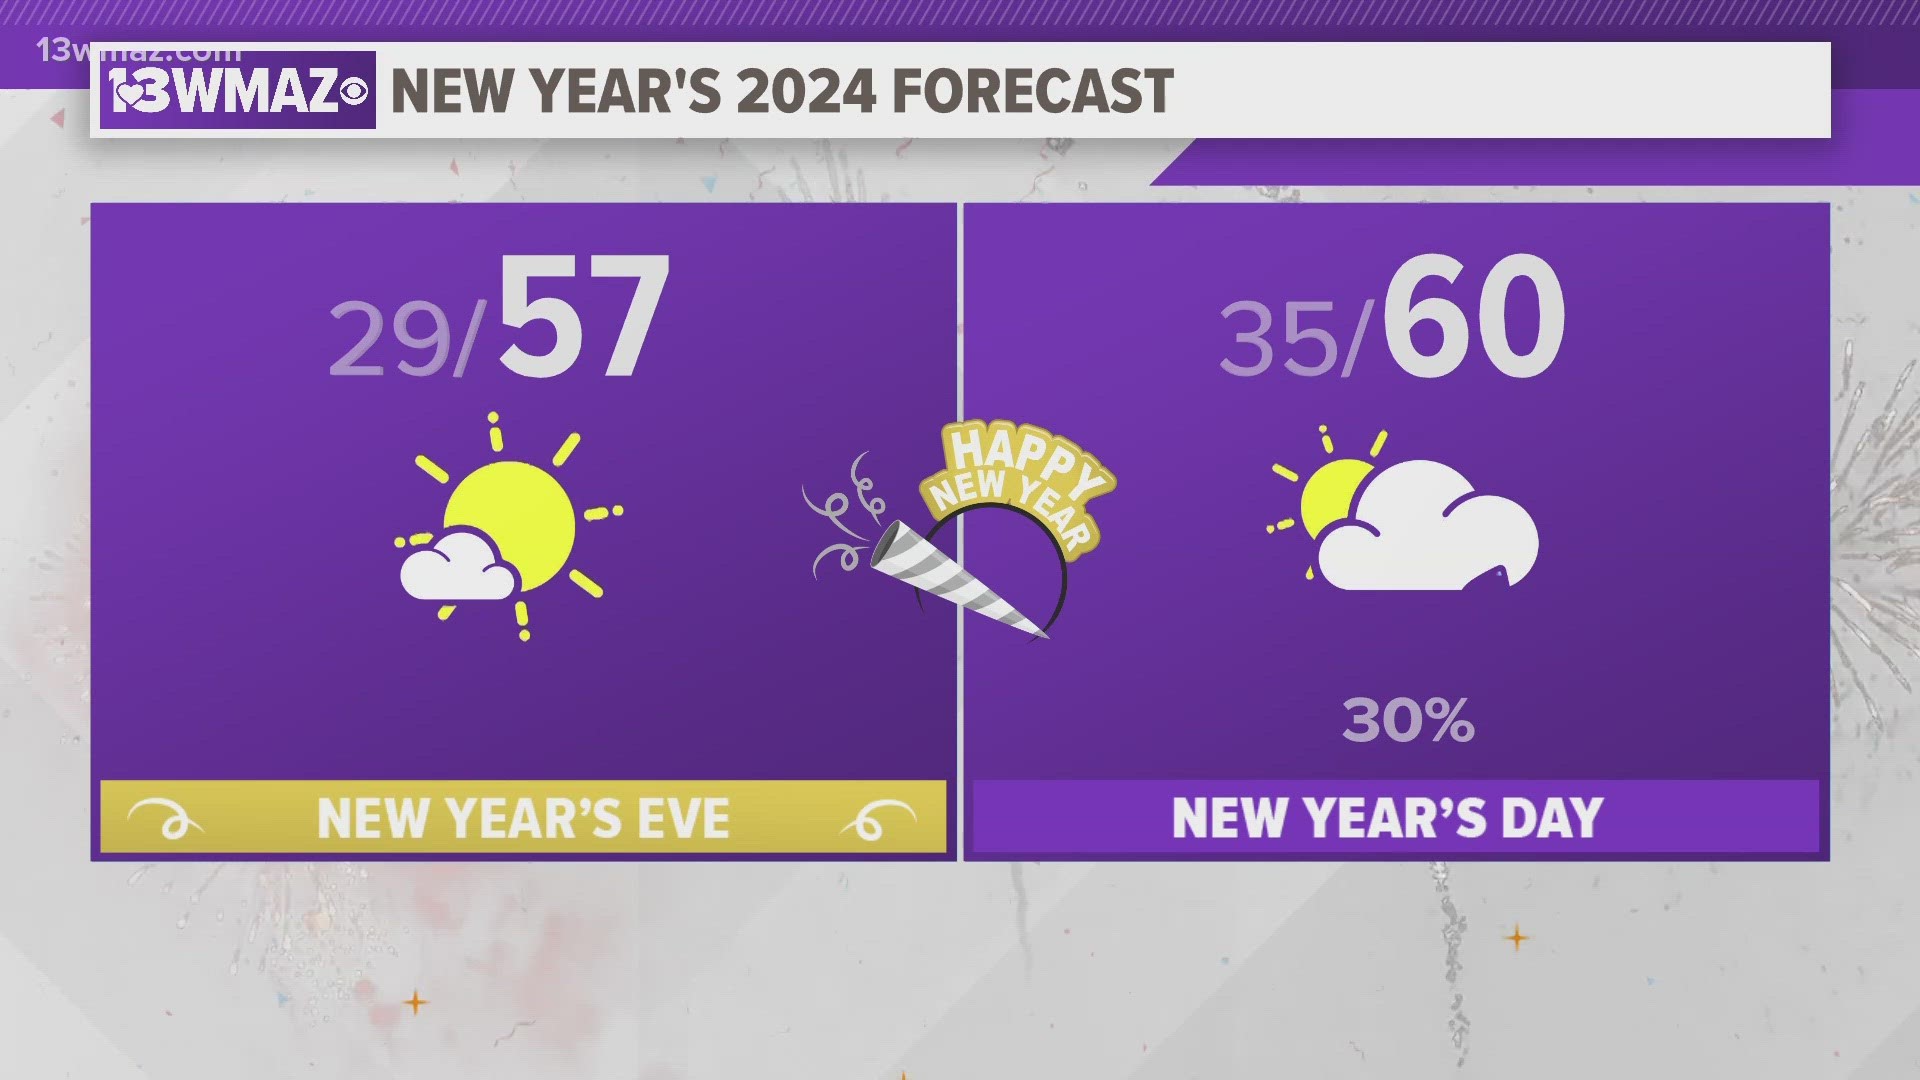 Scattered showers are expected on New Year's Day.